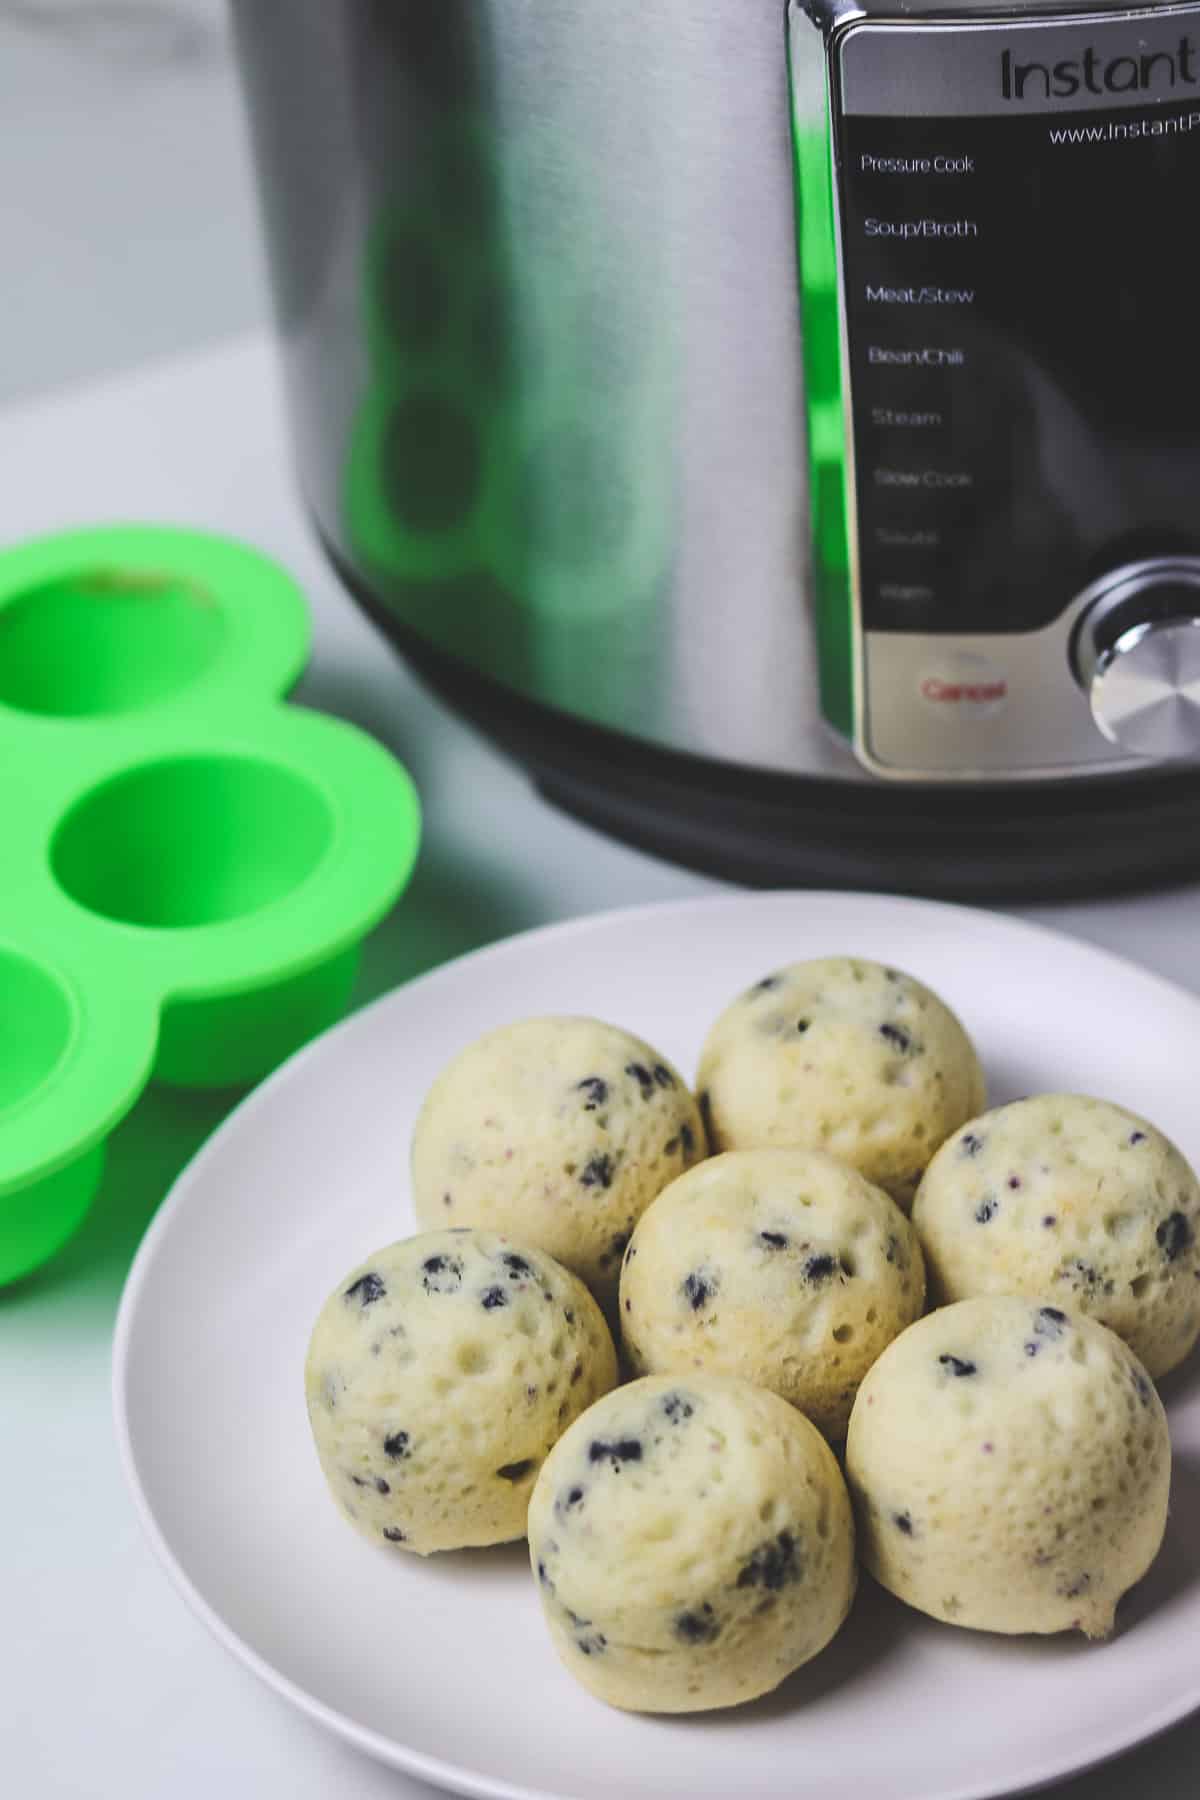 muffin bites in front of the instant pot